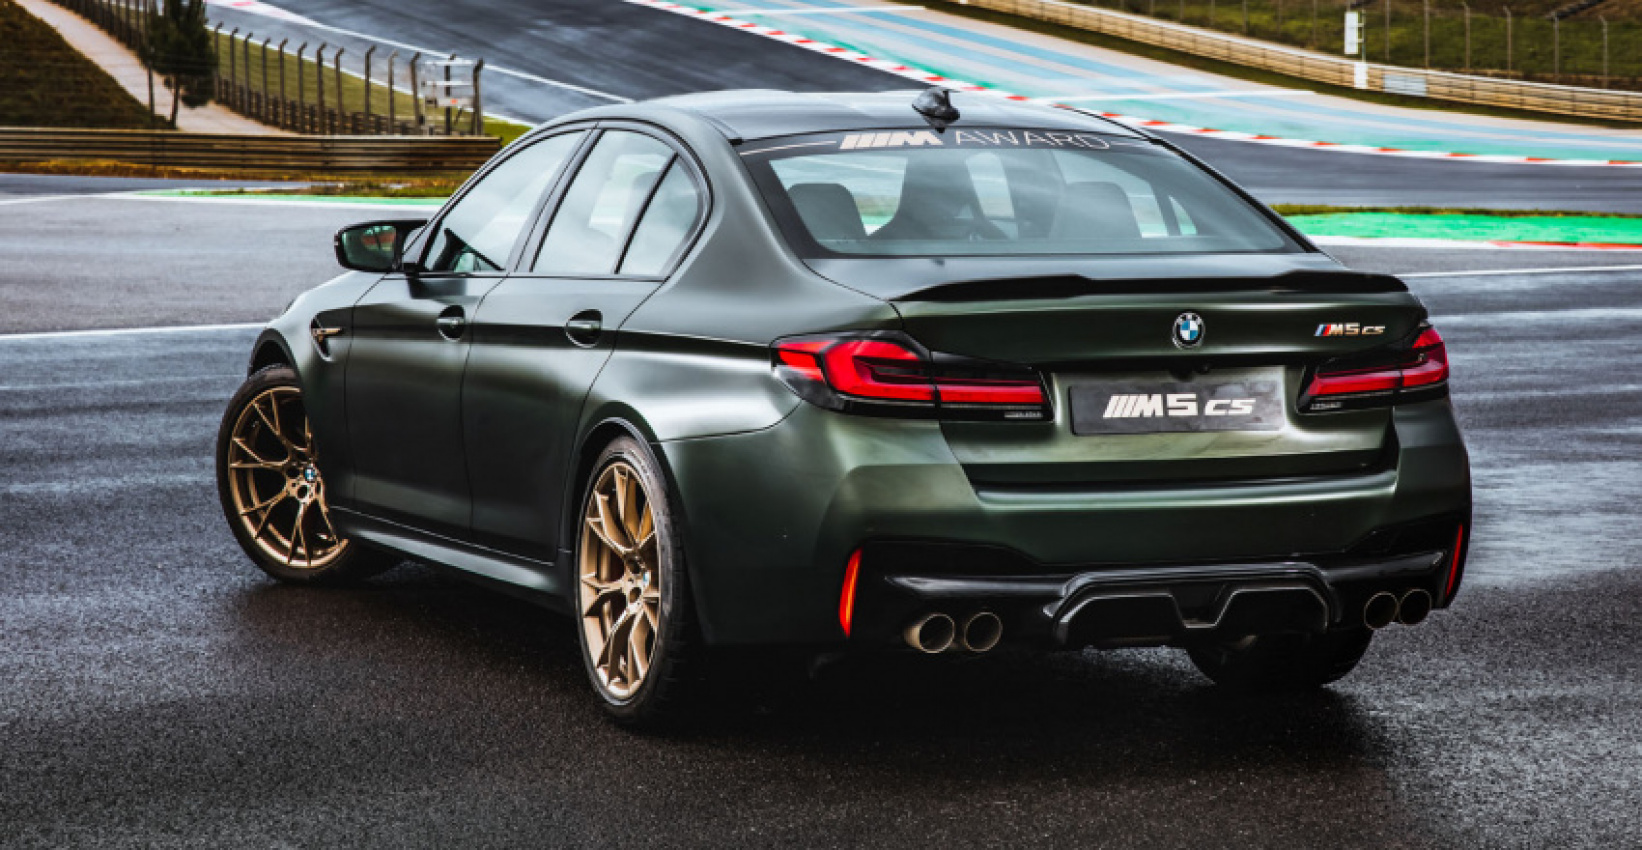 autos, bmw, cars, features, audi, bentley, bmw m5 cs, jaguar, maserati, mclaren, nissan, porsche, bmw m5 cs sold out in south africa – here are the other r3.8-million sports cars you can buy